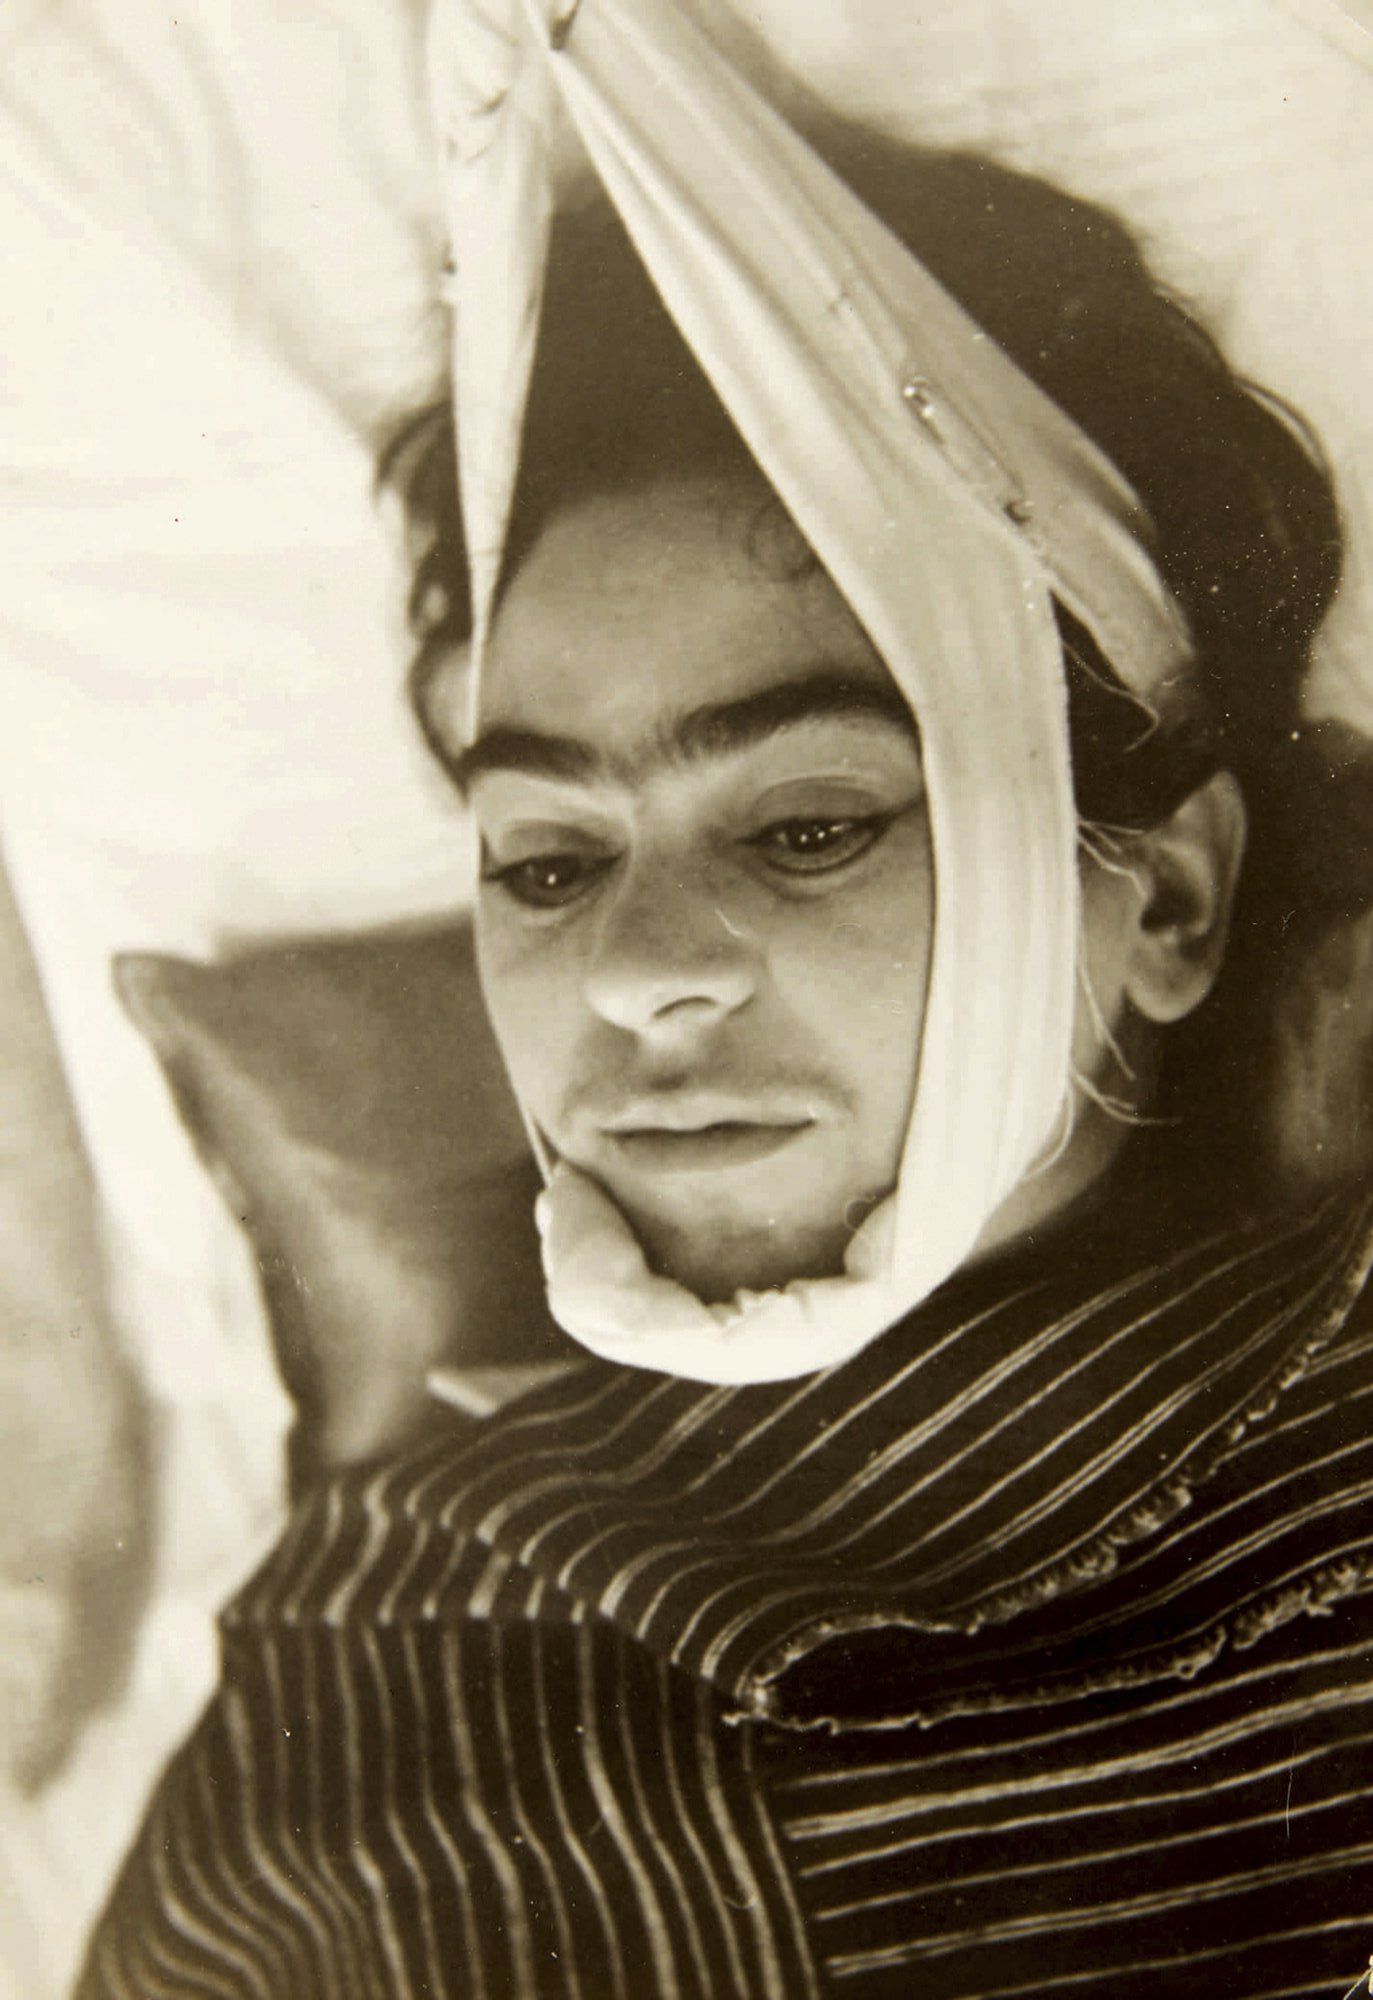 My City - Unseen photos of Frida Kahlo by her lover to be auctioned